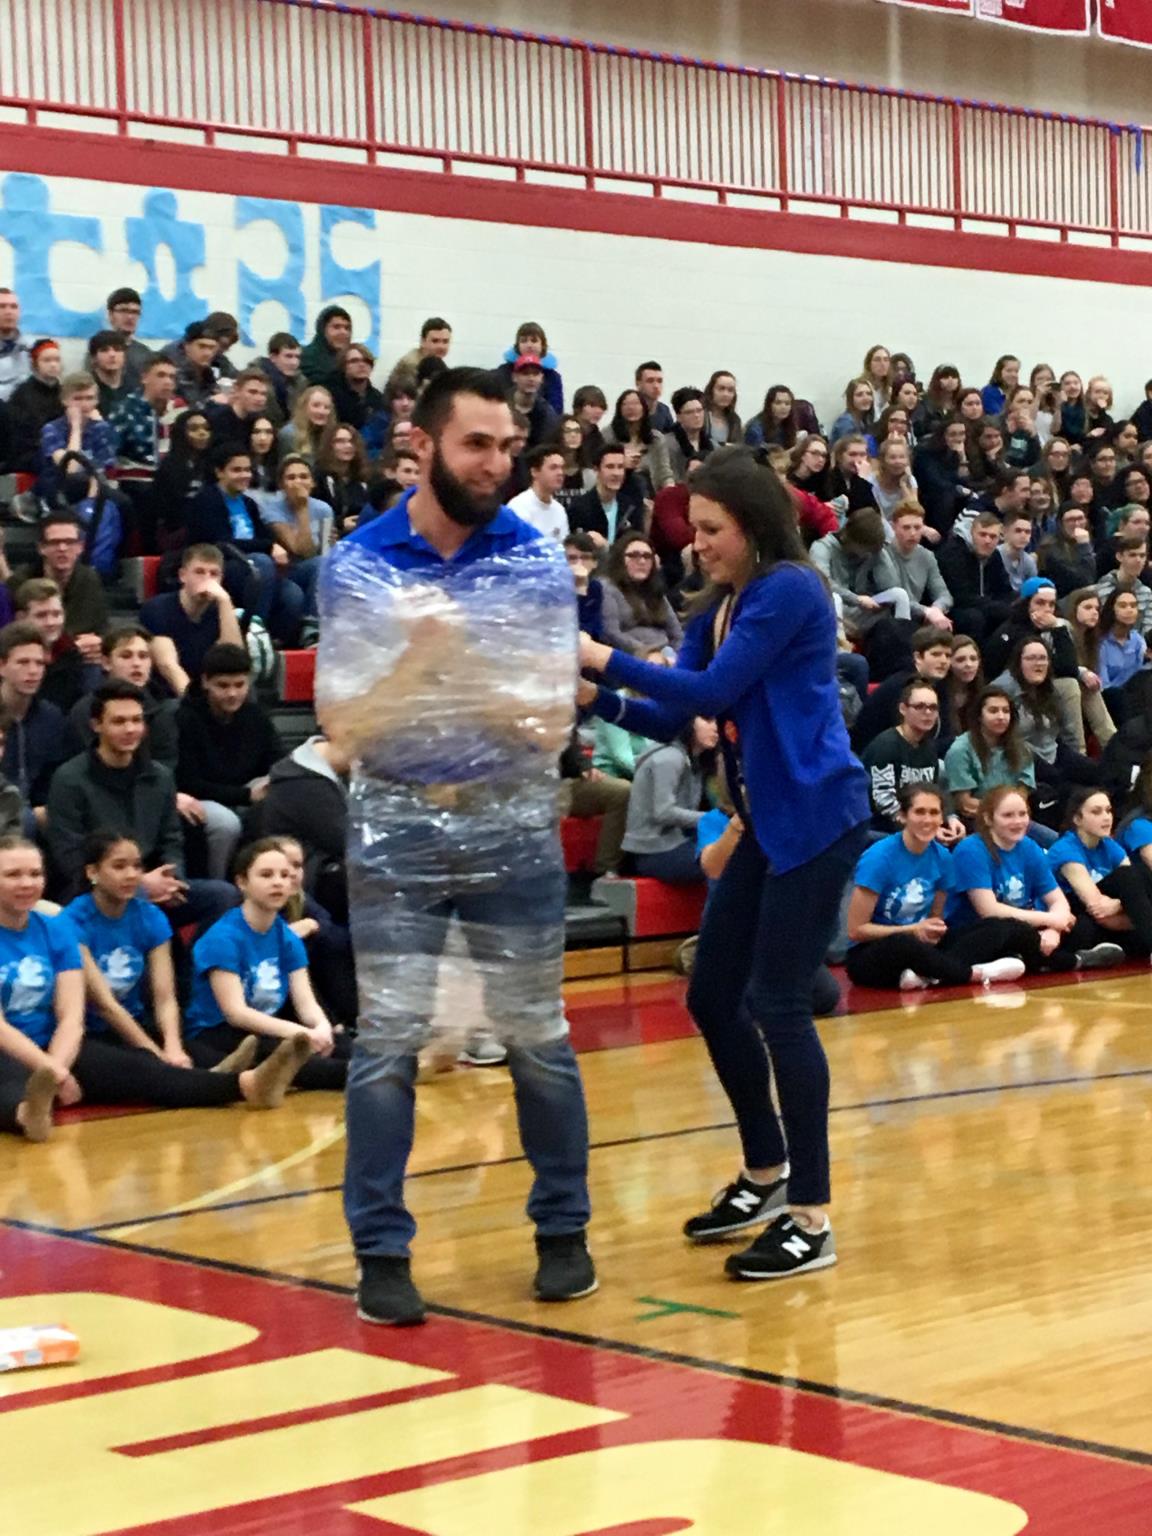 Student wrapping staff member in plastic wrap